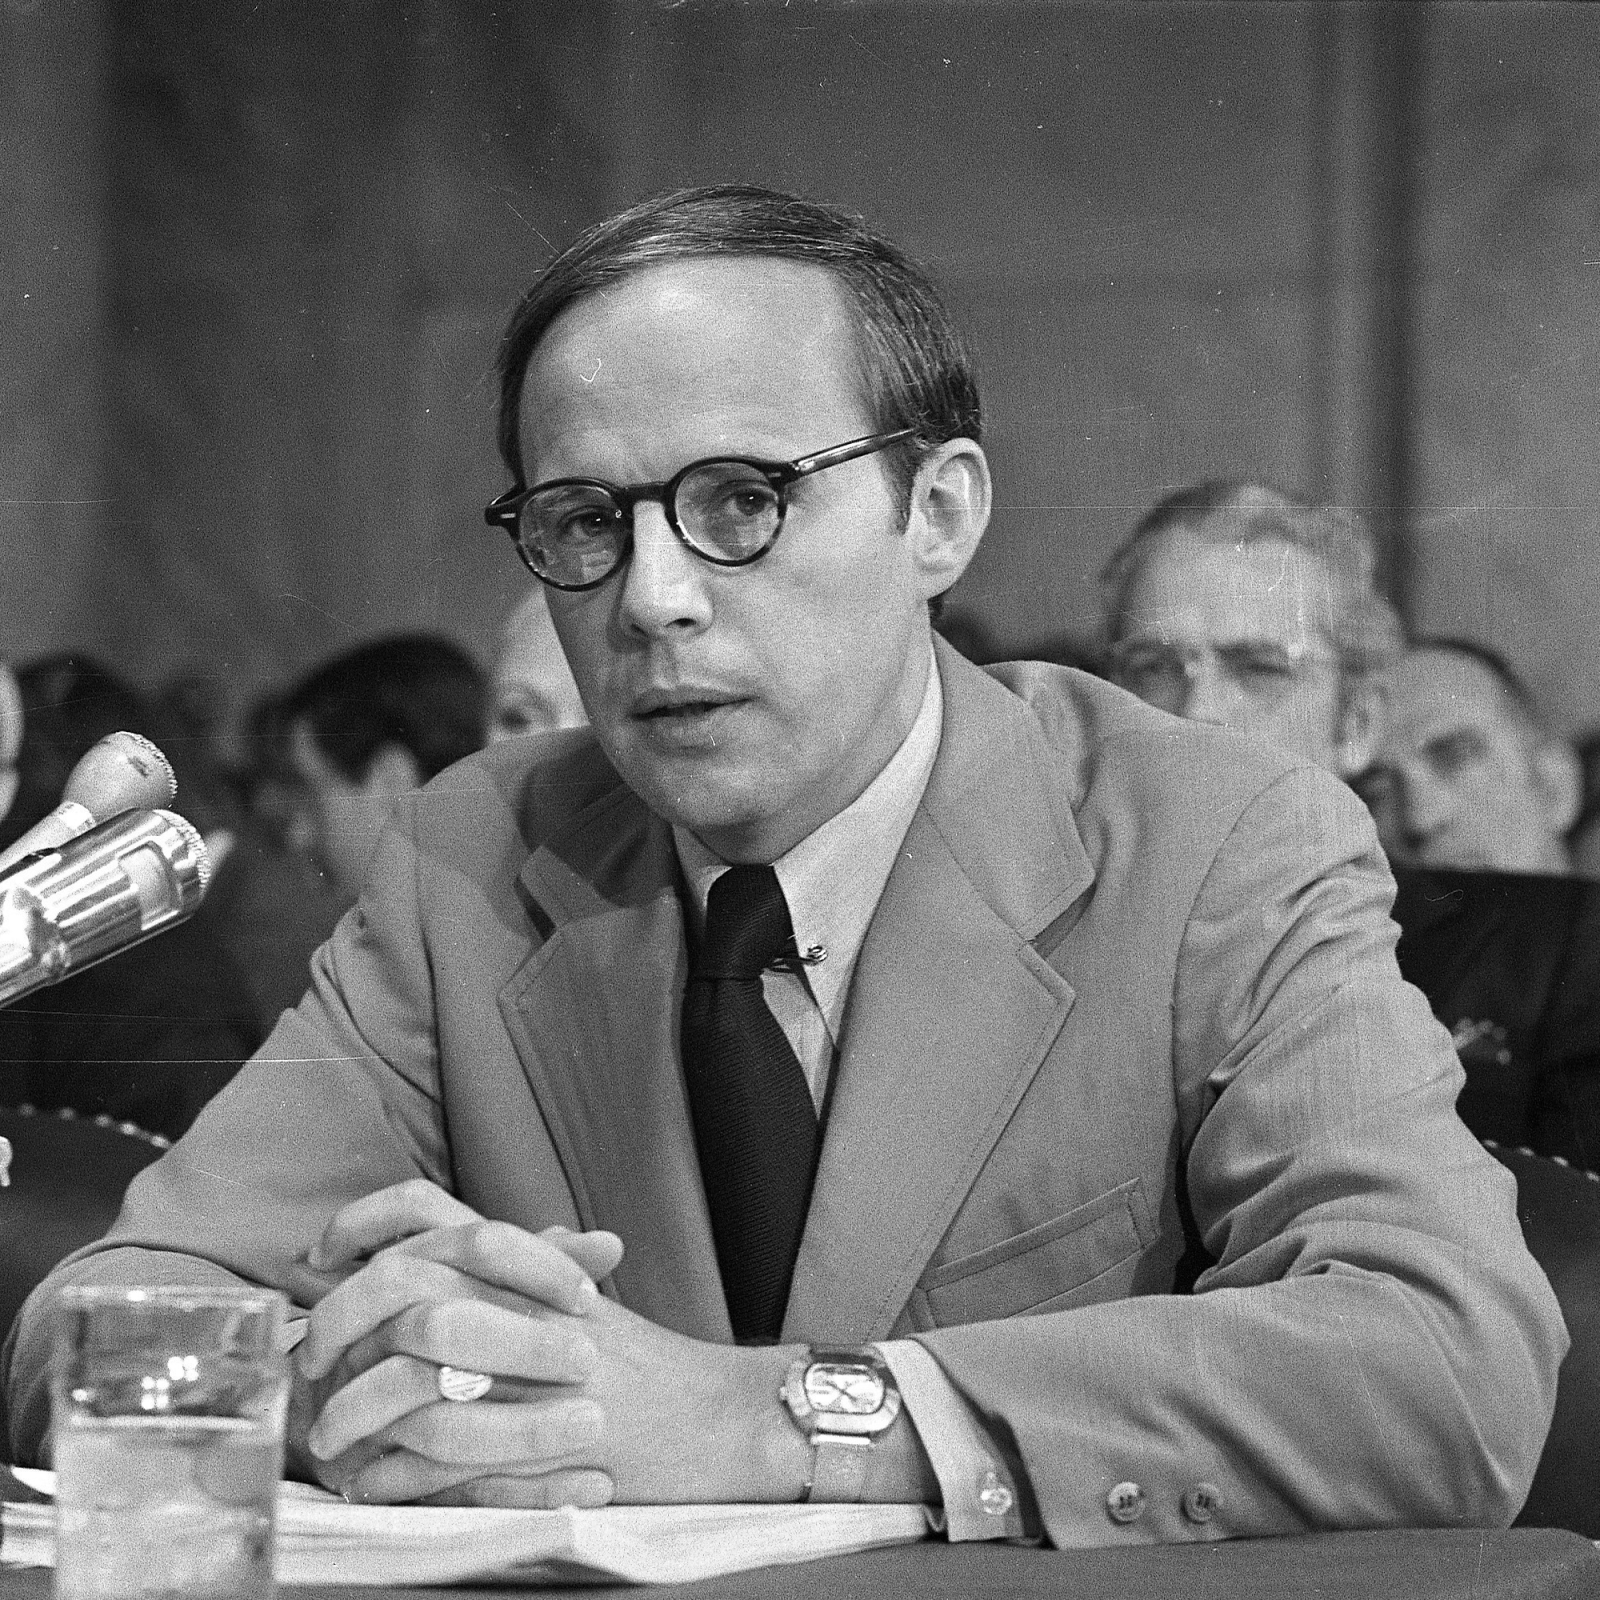 Former White House aide John Dean reads a prepared statement before the Senate Watergate Committee on June 25, 1973.